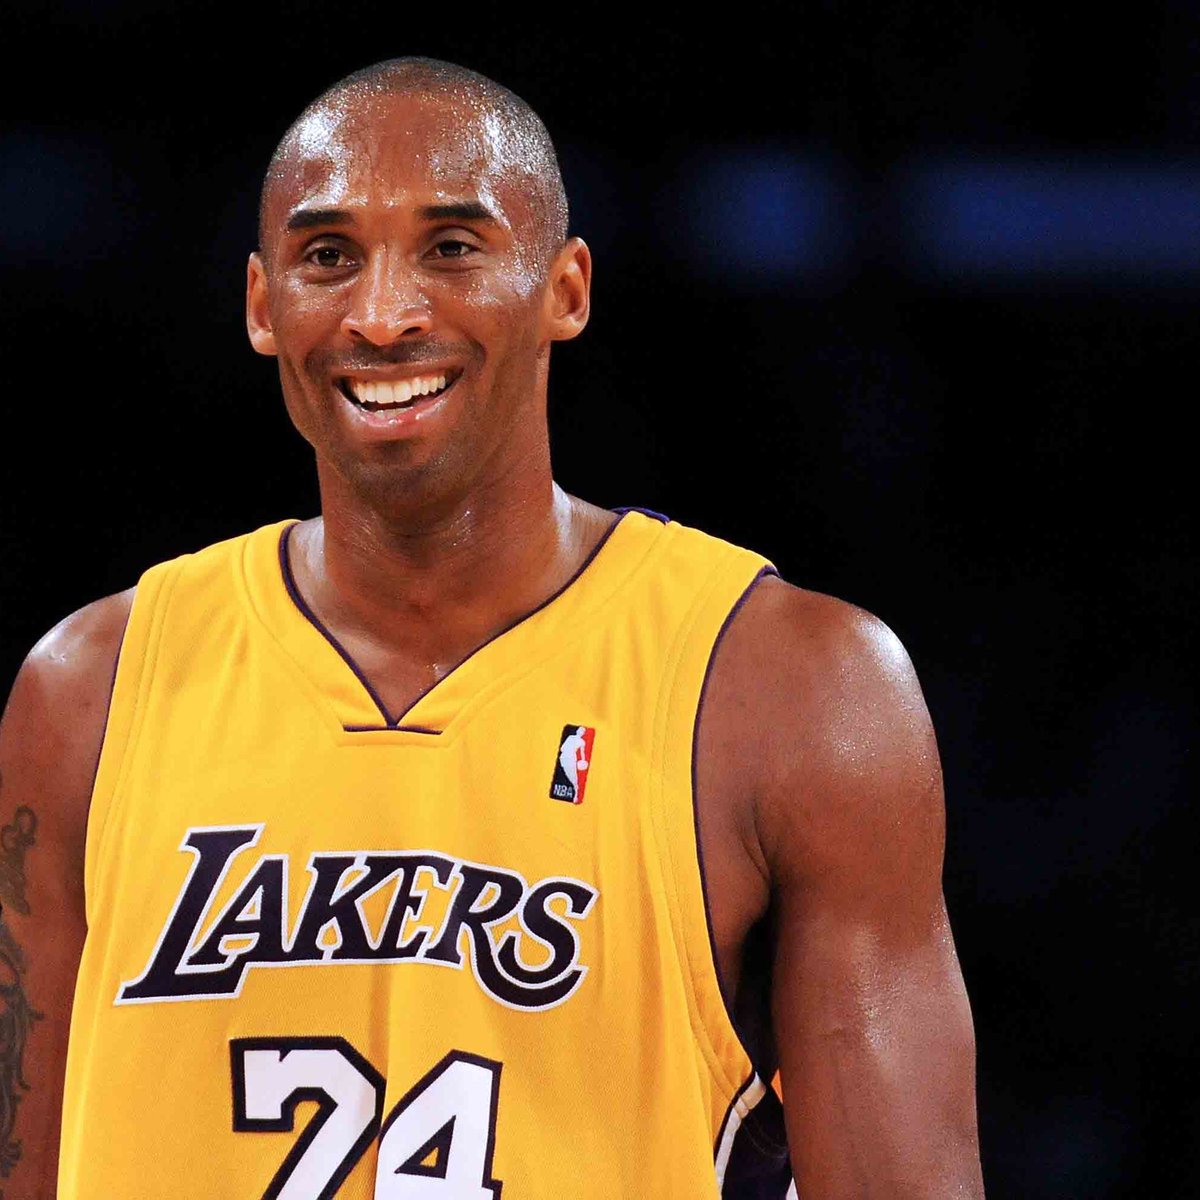 Phil Handy asked Kobe why he was such an a-hole. Kobe’s response: “I see dudes walk in 10 mins before practice & leave right after. Why the f— am I gonna pass them the ball? I don’t respect their work ethic. I’m busting my ass & they don’t want to work.” (via All The Smoke Pod)